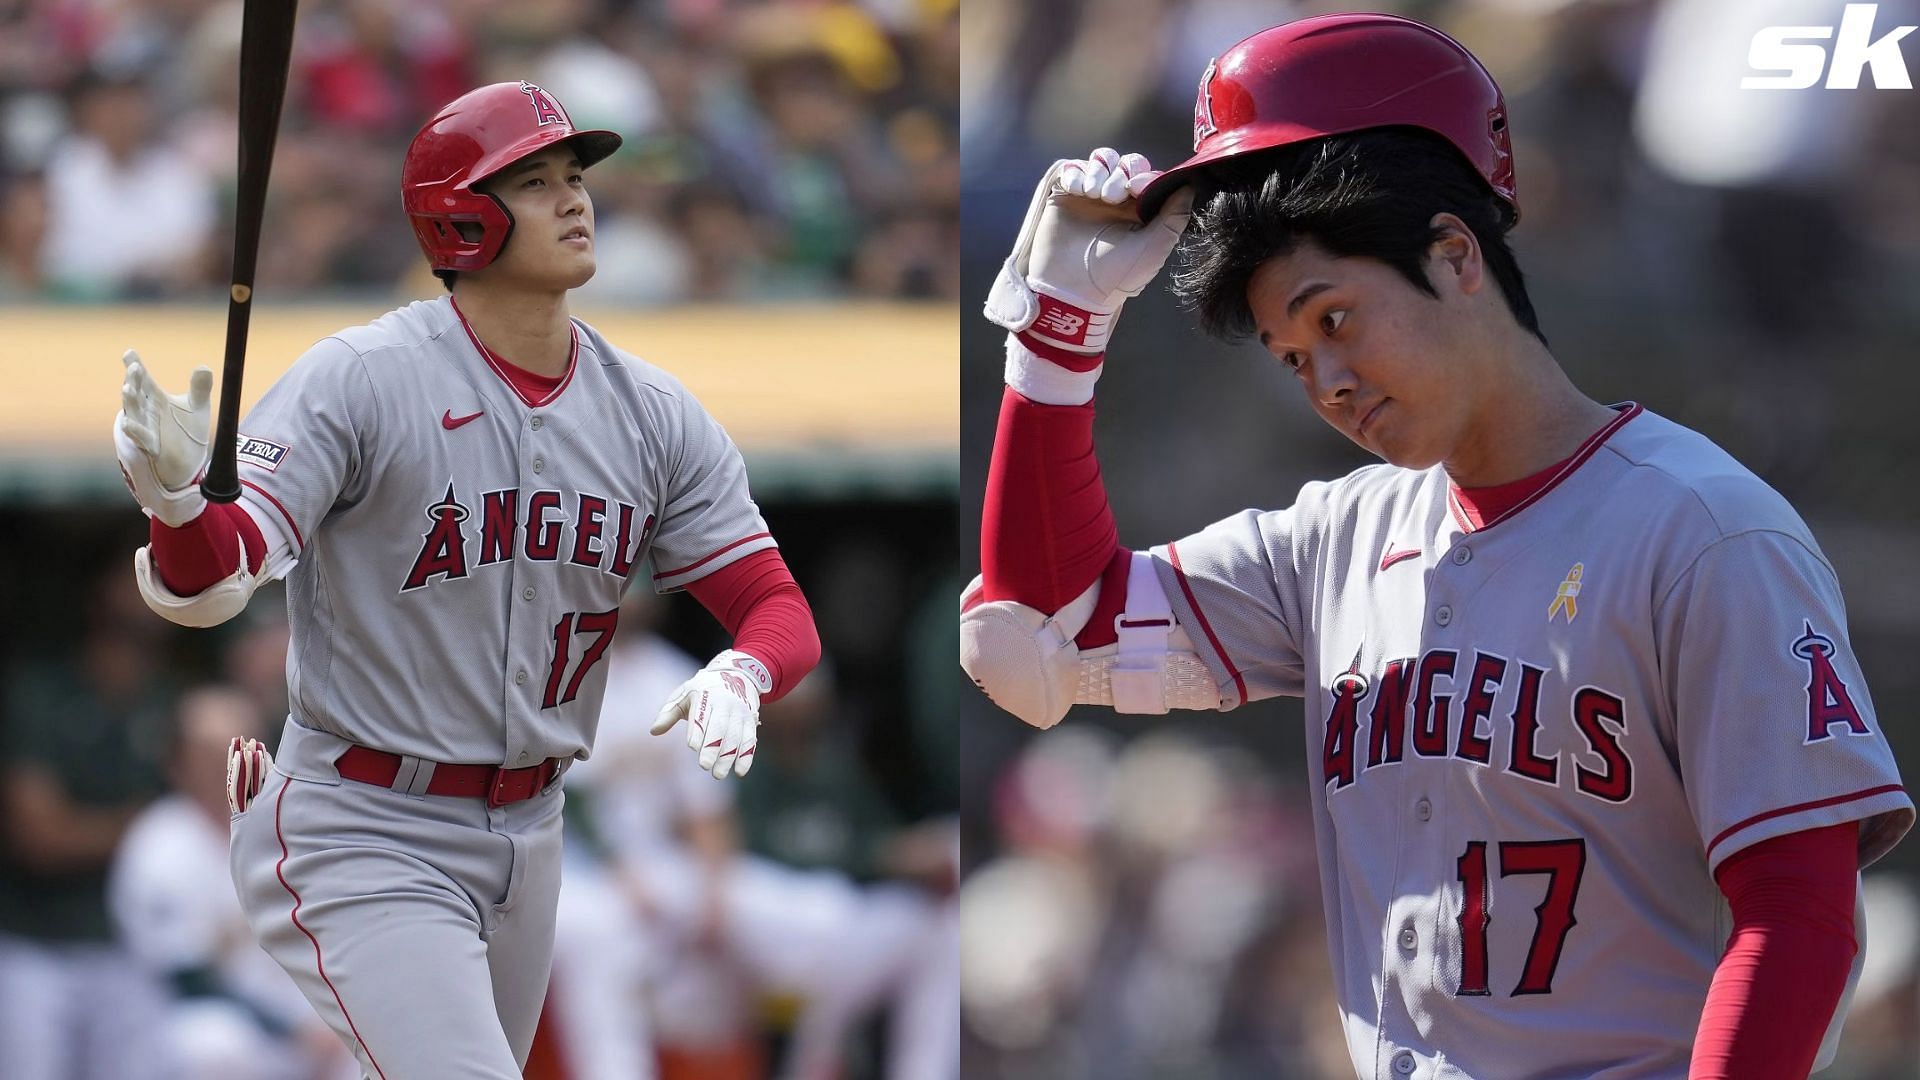 Shohei Ohtani will undergo a procedure to rehabilitate his torn UCL